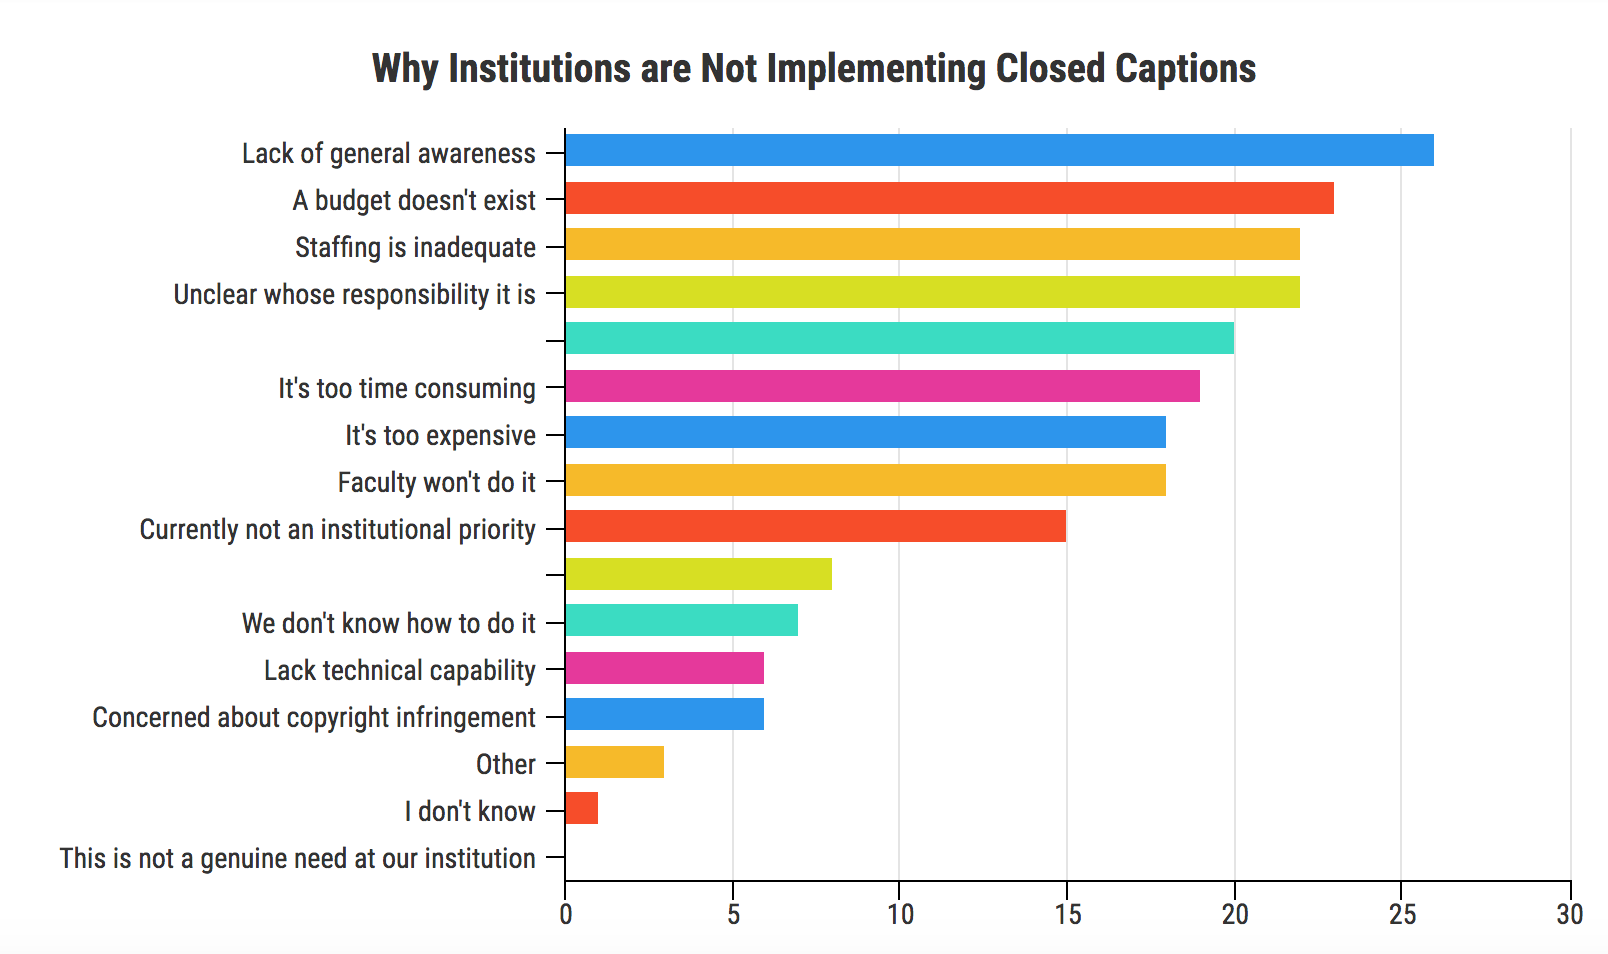 Why Institutions Are Not Captioning